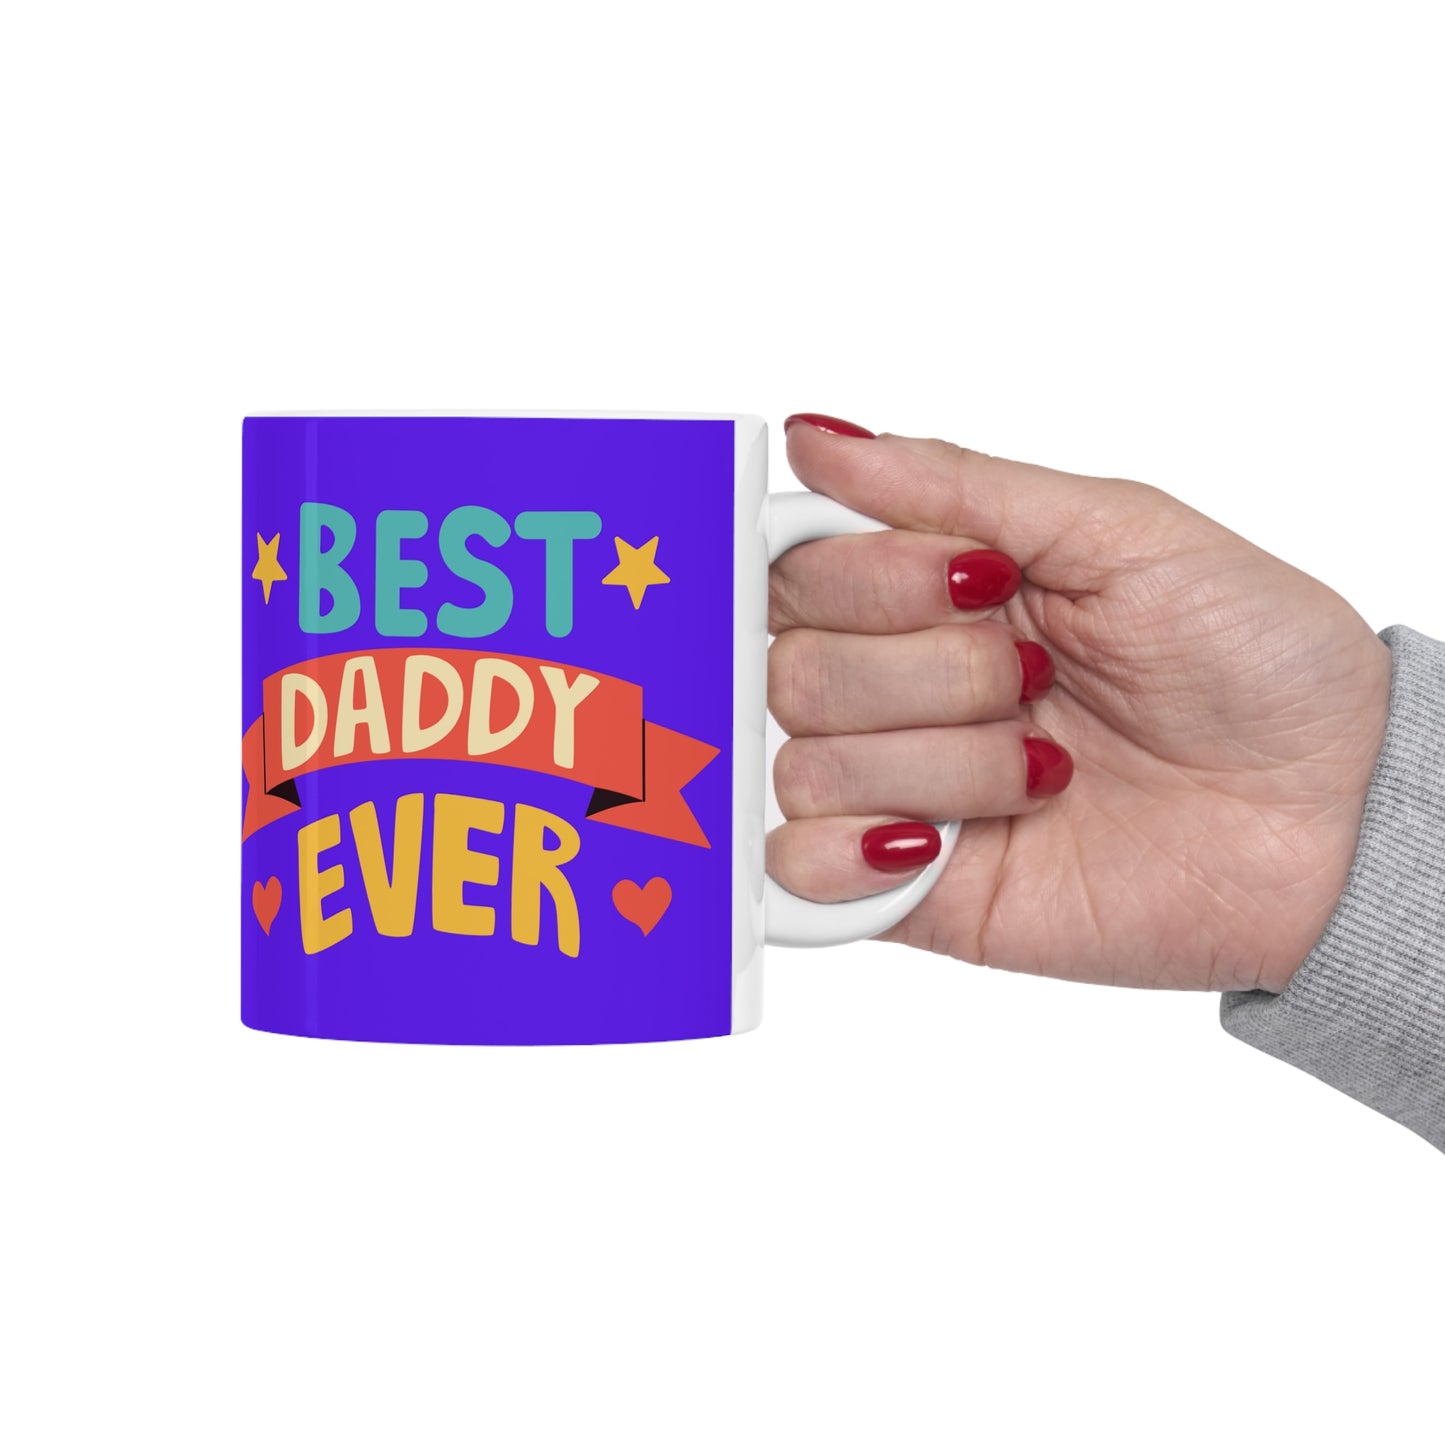 “BEST DADDY EVER” on one side and a dad teaching his child to ride a bike. Part of several mugs to choose from depending on what resonates with you.